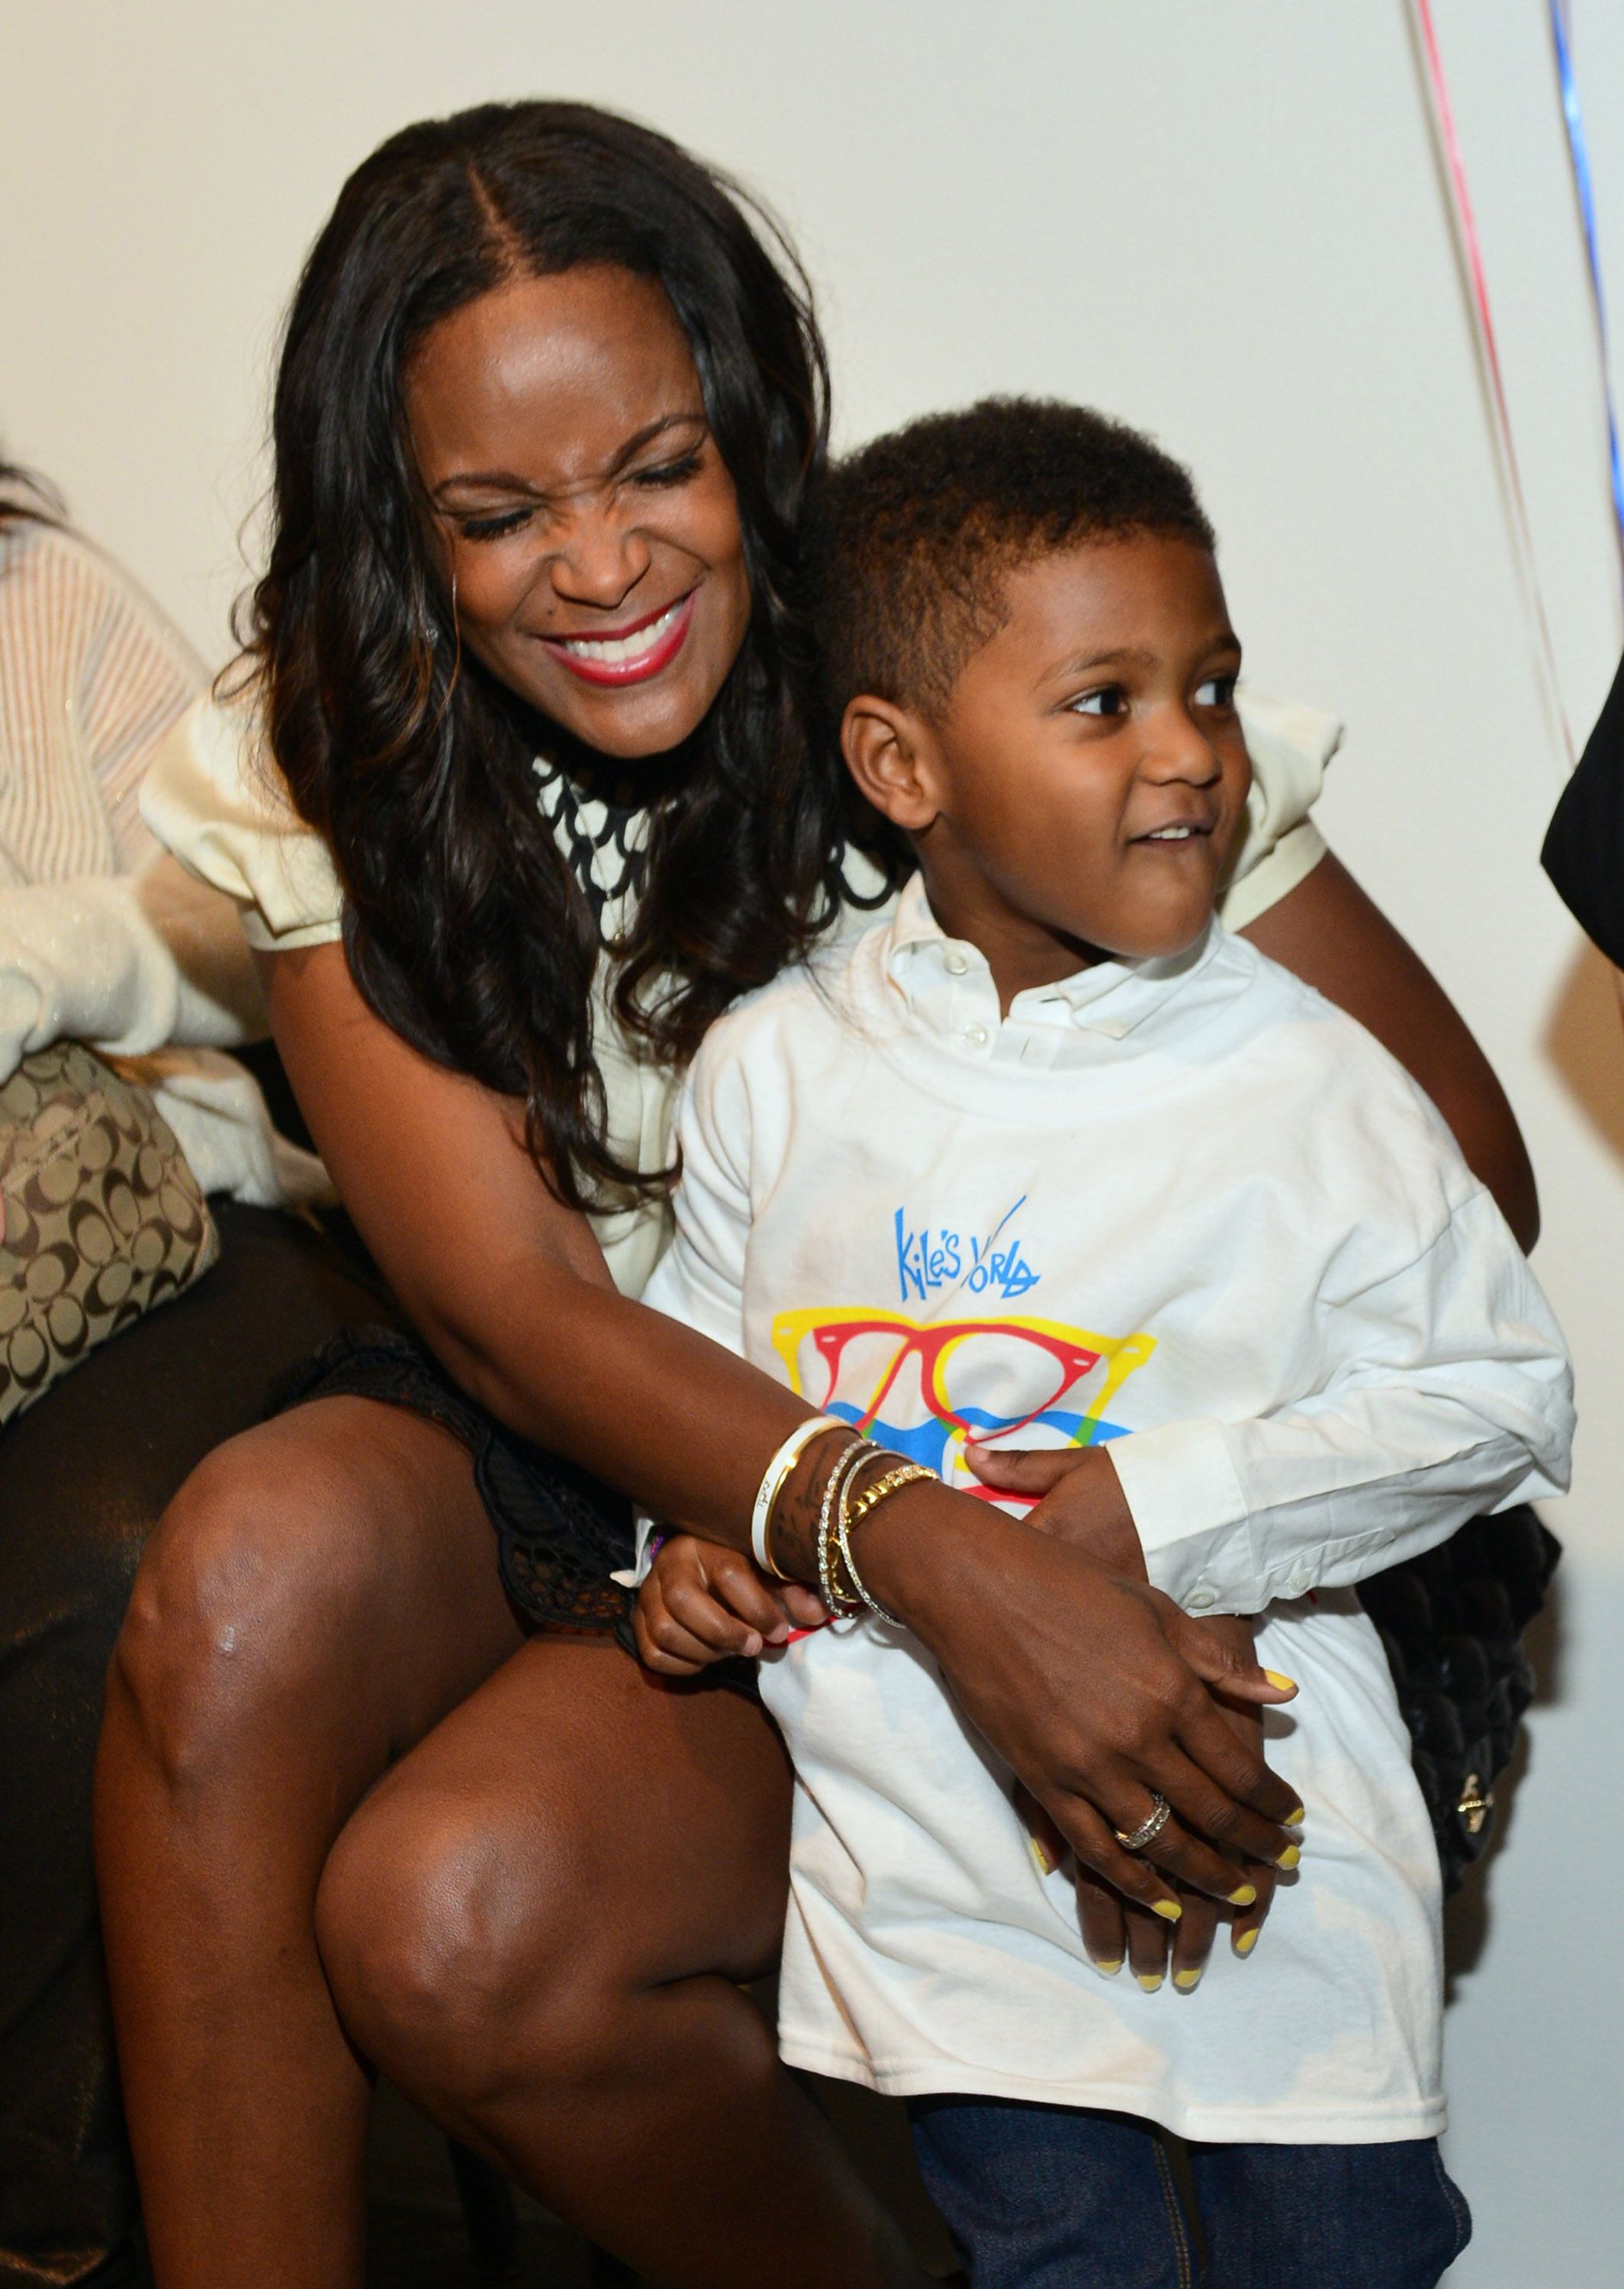 Tameka Foster and Naviyd Raymond during the birthday and foundation lanuch Kile's World to honor Kile Glover at the Woodruff Arts Center on March 29, 2013 in Atlanta, Georgia. | Source: Getty Images